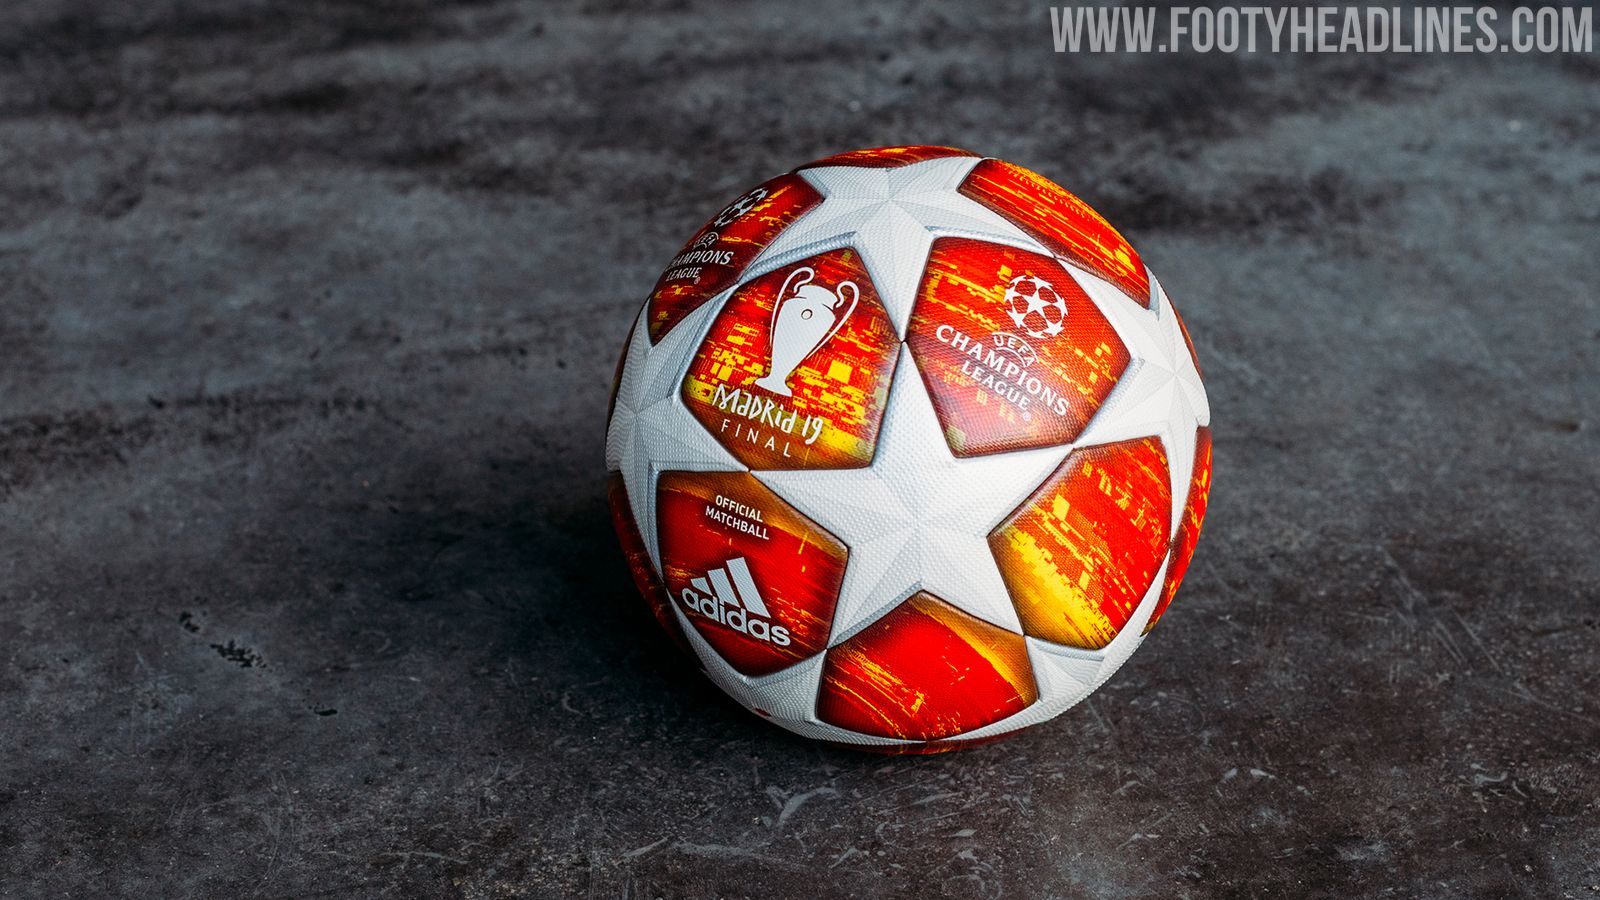 Adidas Finale 18 is official match ball of Champions League 2018/2019